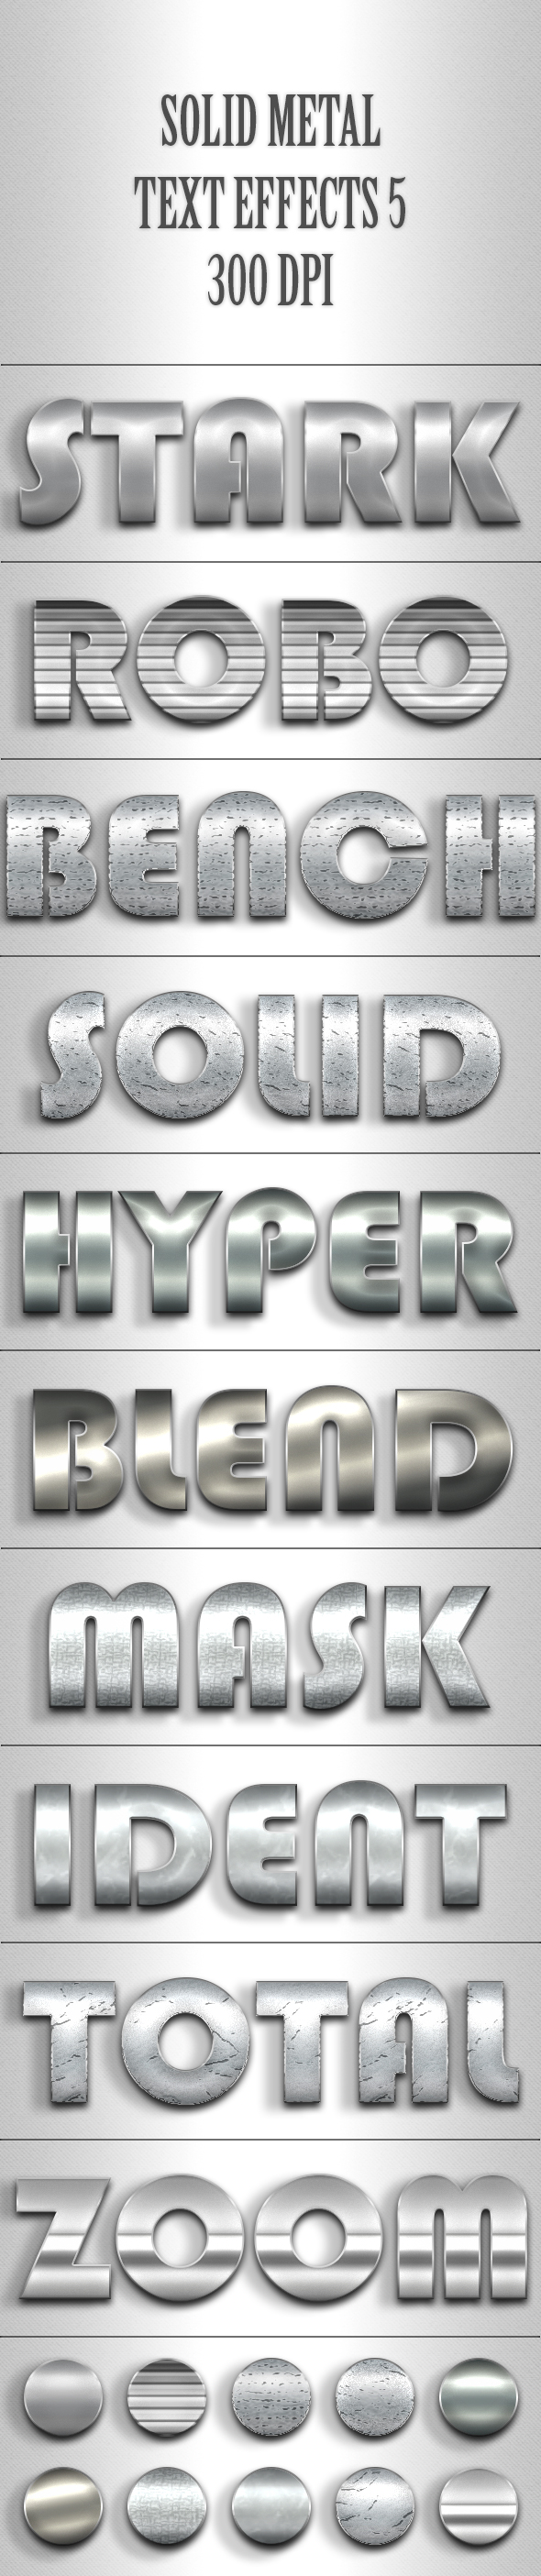 Solid Metal Text Effects 5